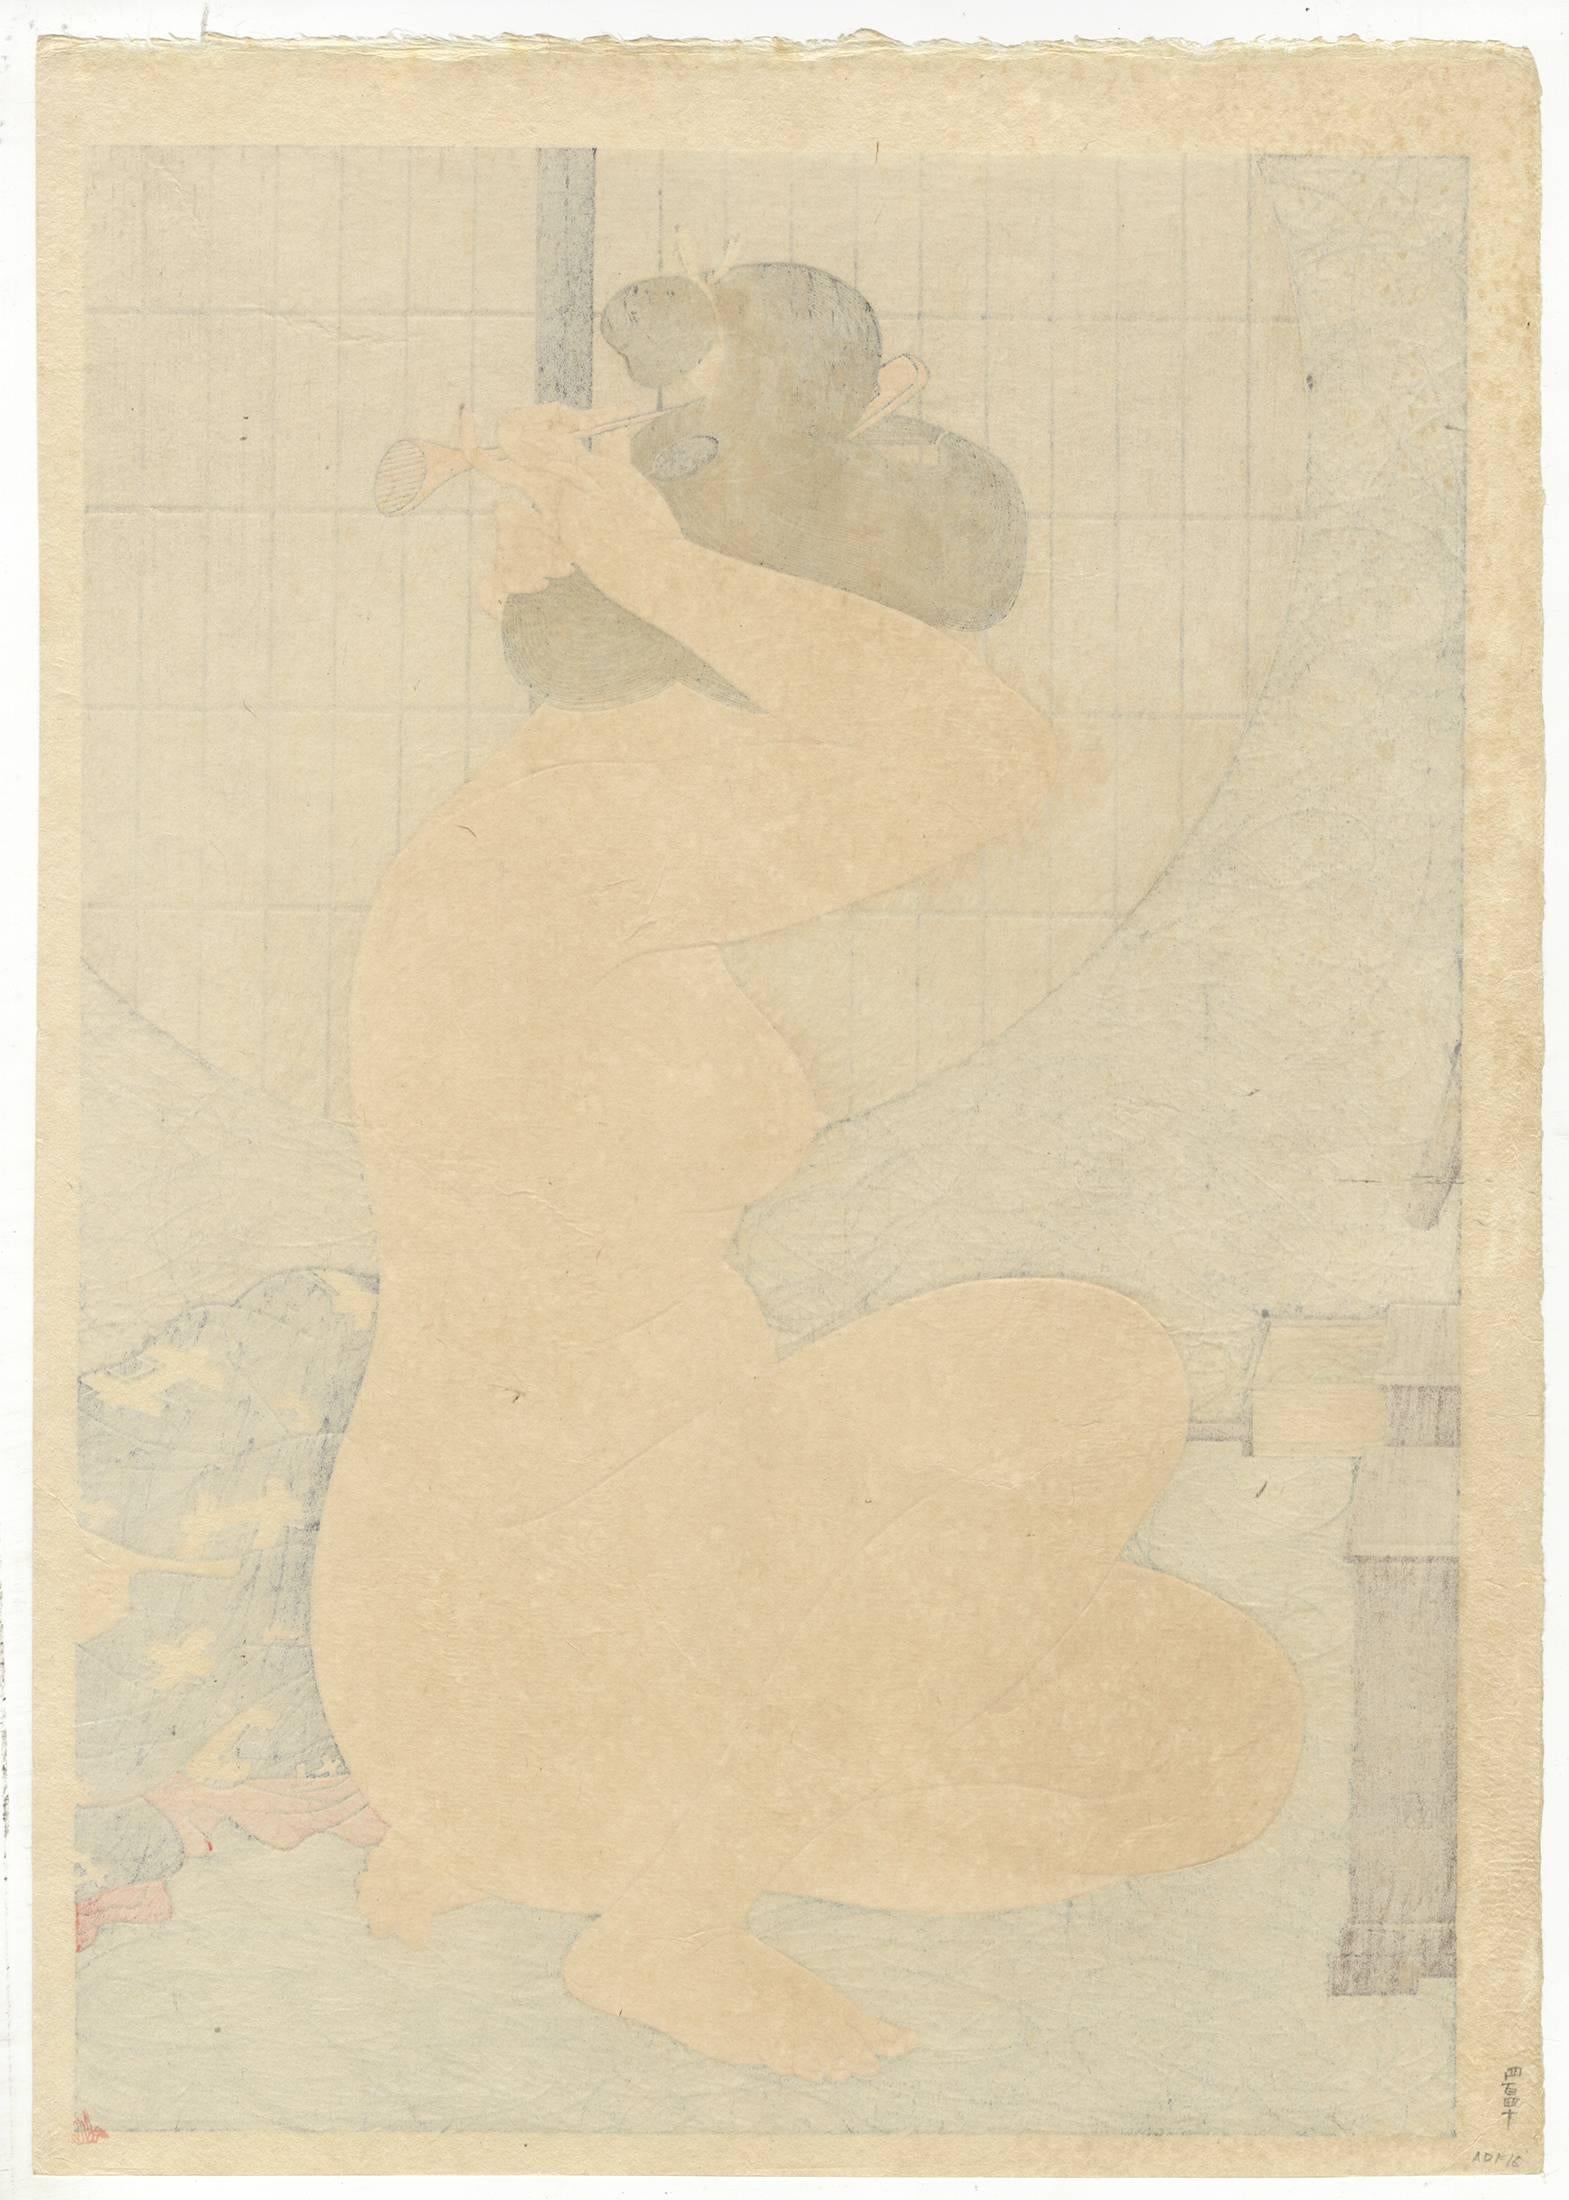 Artist: Hirano Hakuho
Title: Arranging Hair
Publisher: Watanabe Shozaburo
Published: 1932

This print shows a woman getting dressed for the day, or possibly getting undressed for the night, in a private setting. She seems to be doing up her